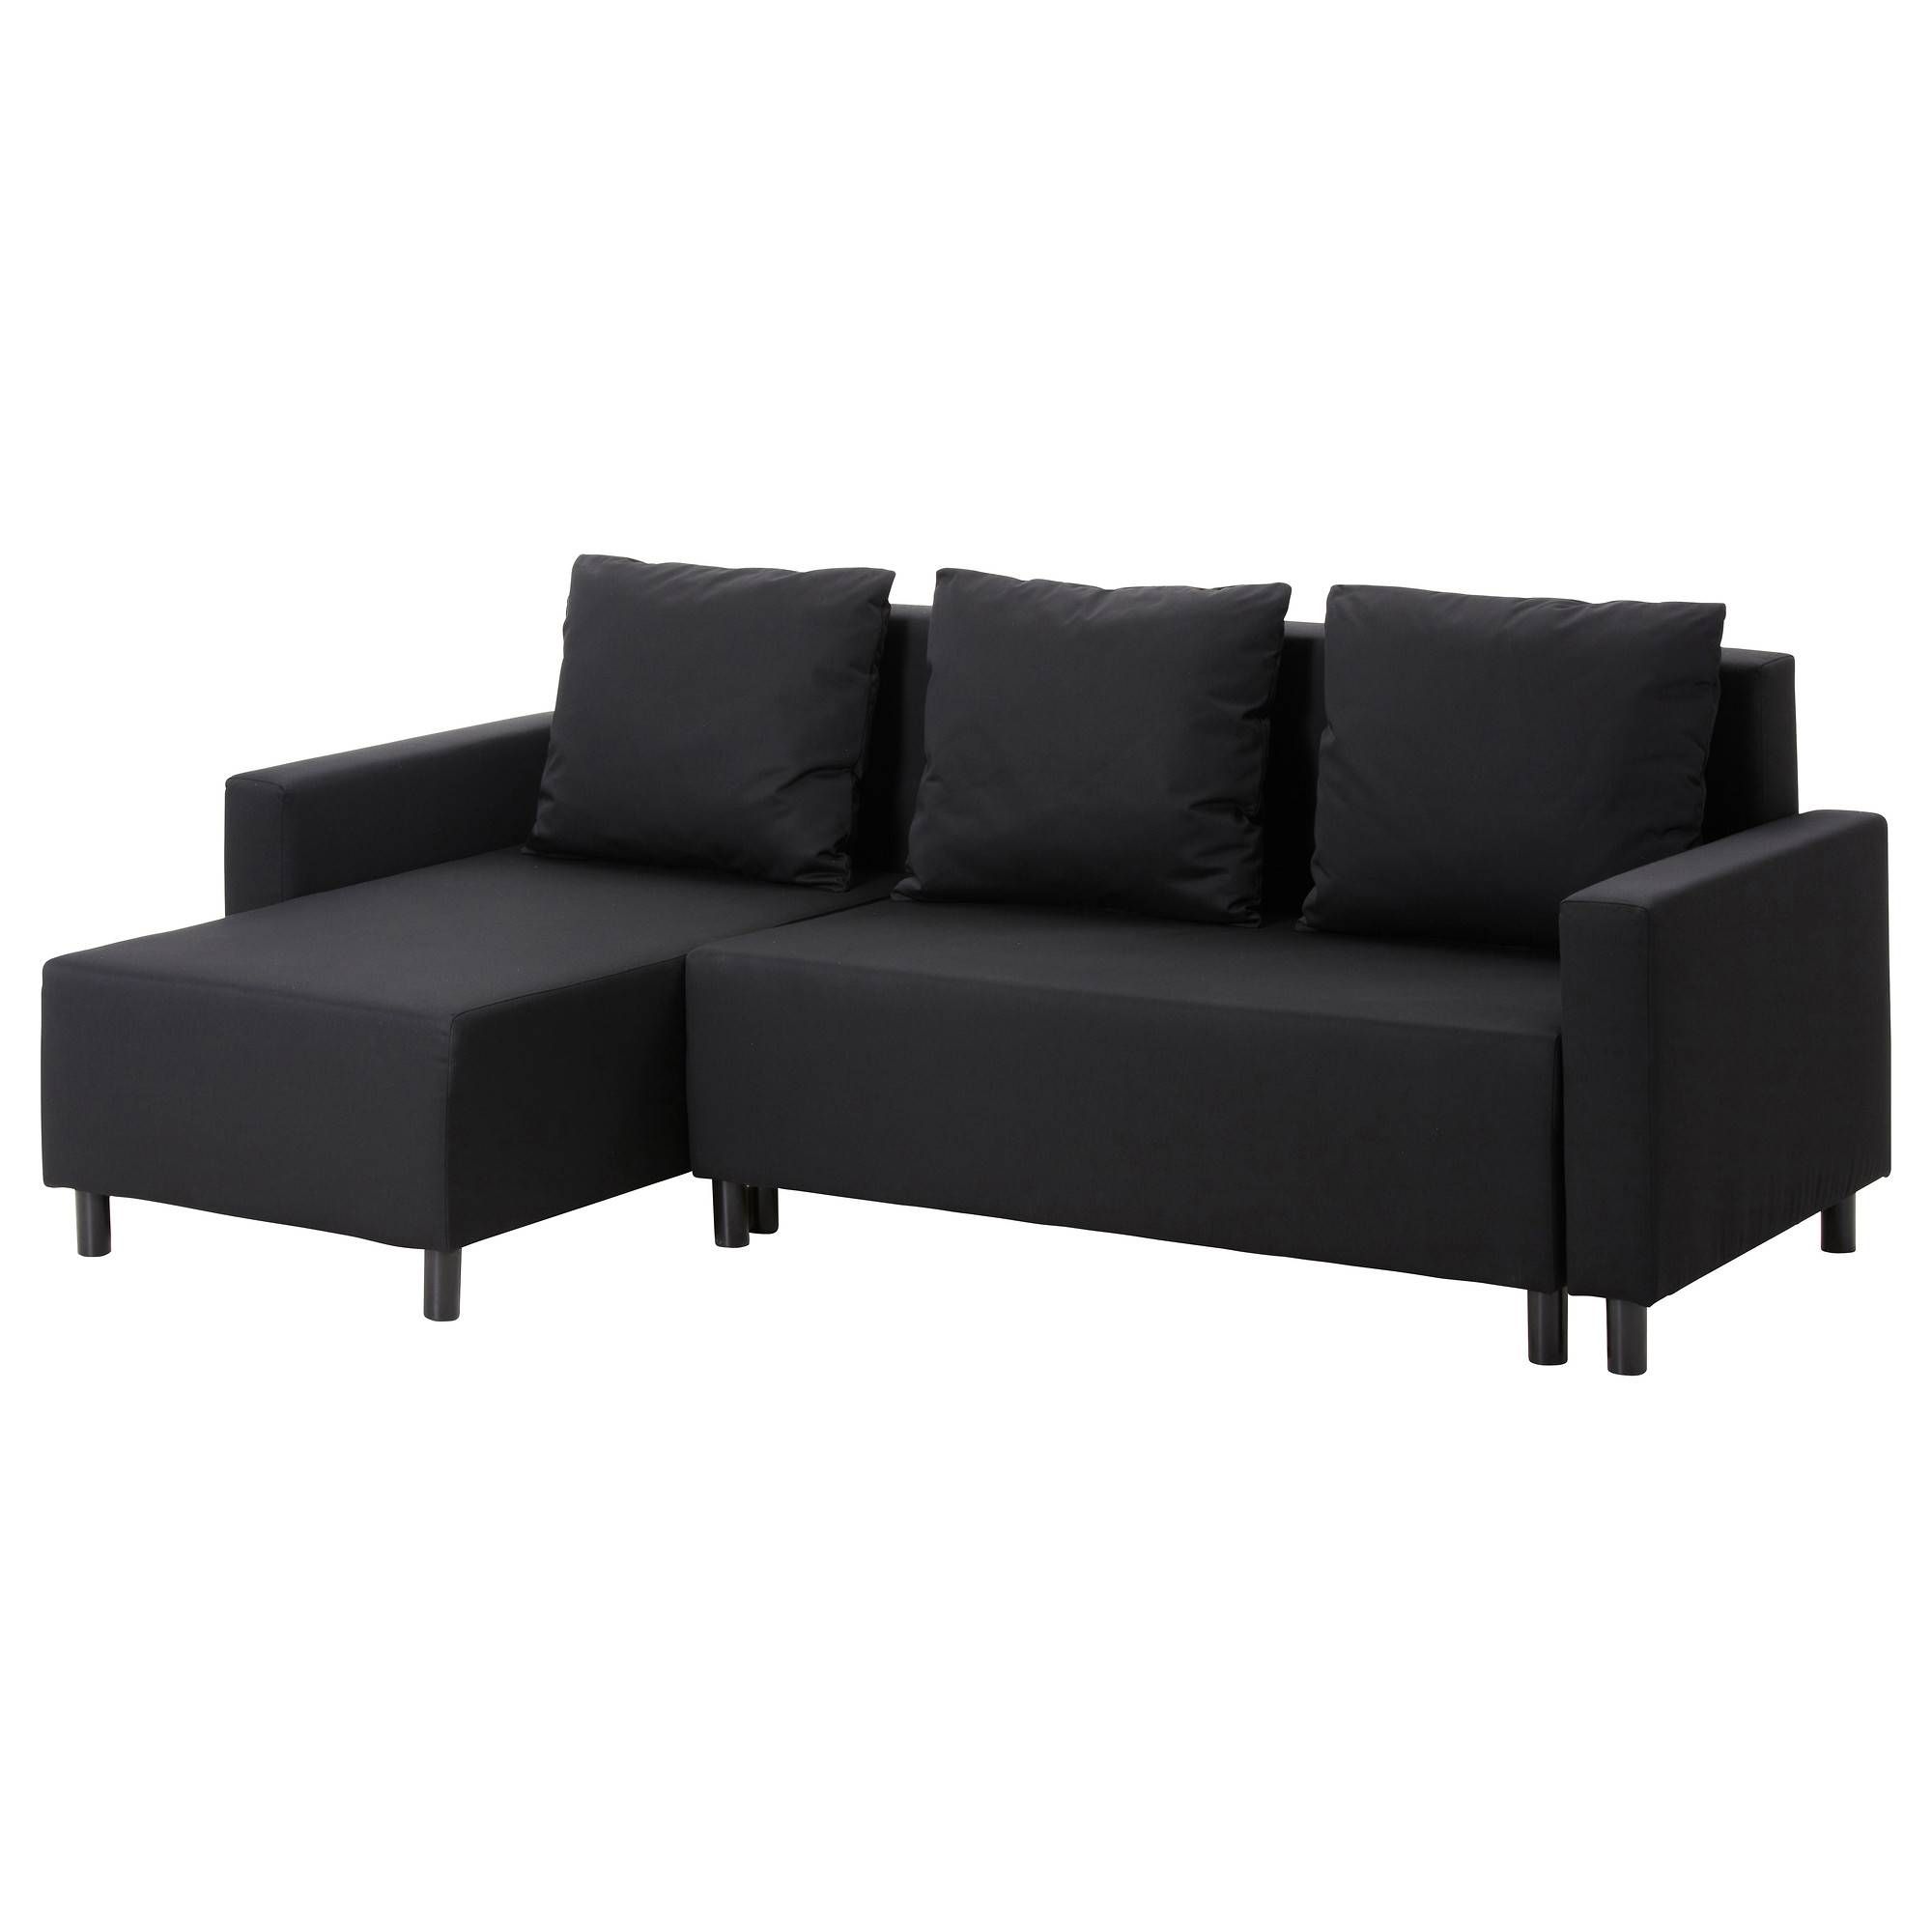 Lugnvik Sofa Bed With Chaise Longue Granån Black – Ikea Throughout Storage Sofas Ikea (View 8 of 25)